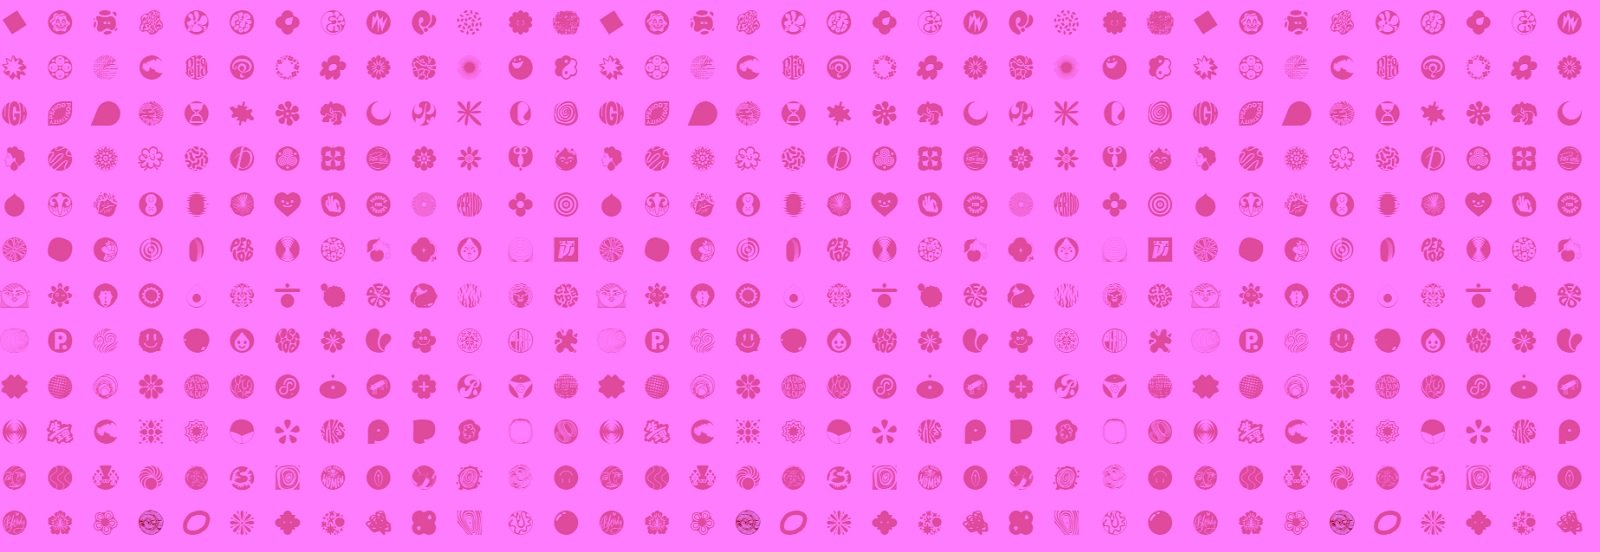 Periods for Periods – a font made entirely out of periods